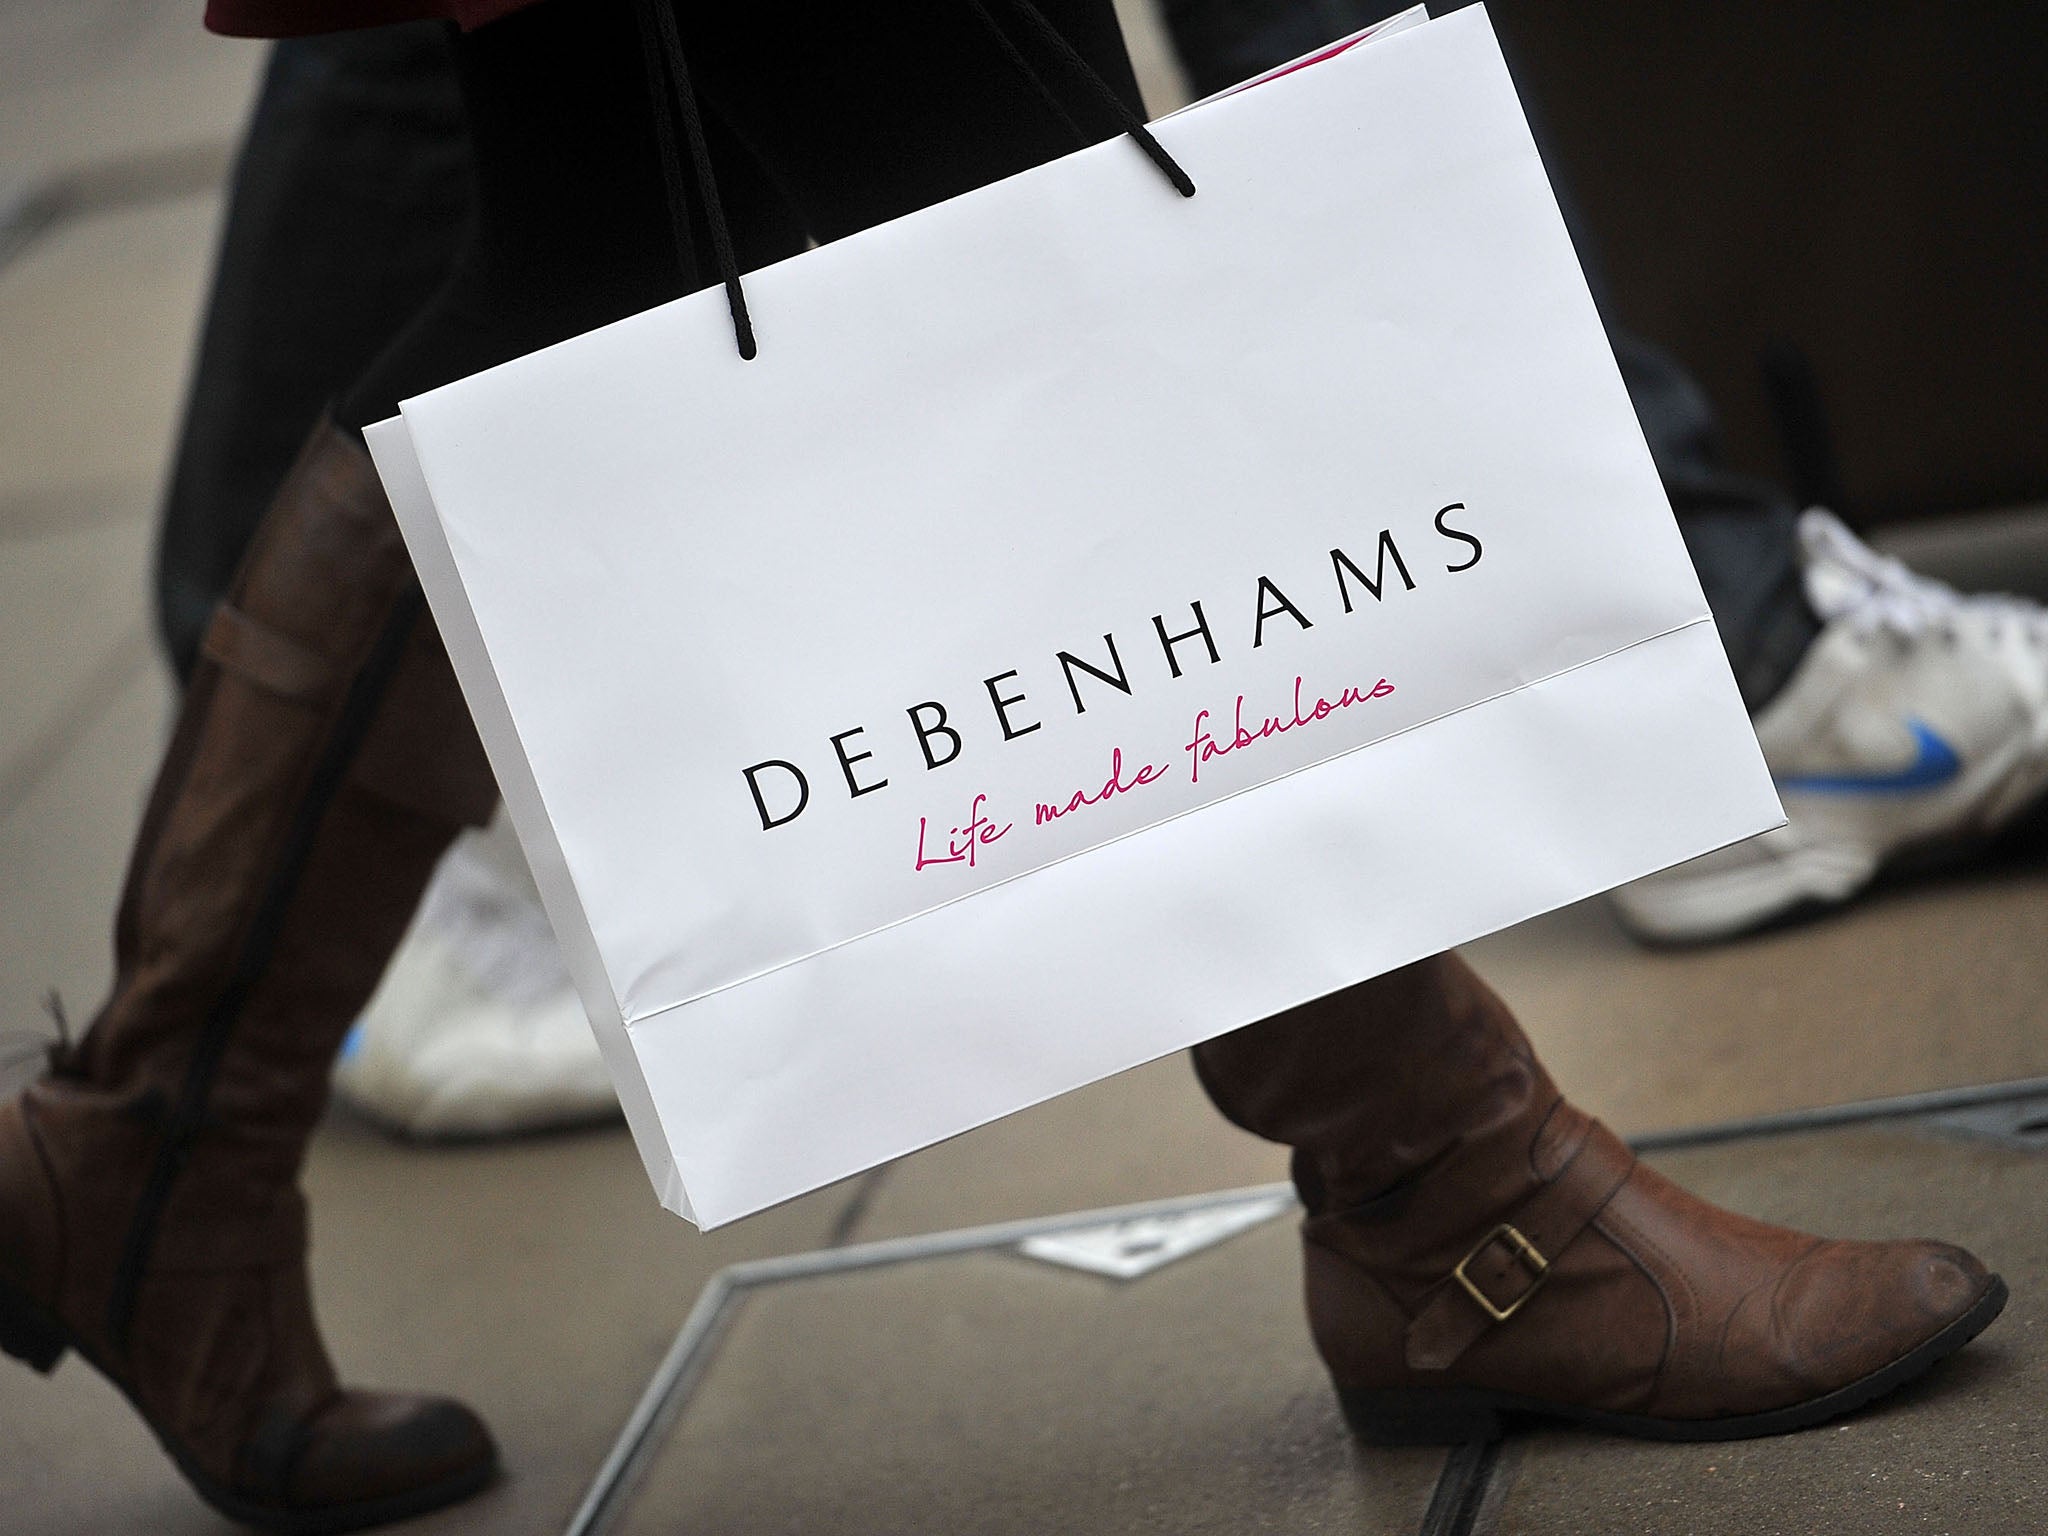 Debenhams said profit before tax for the full year is likely to be in the range of £55m to £65m